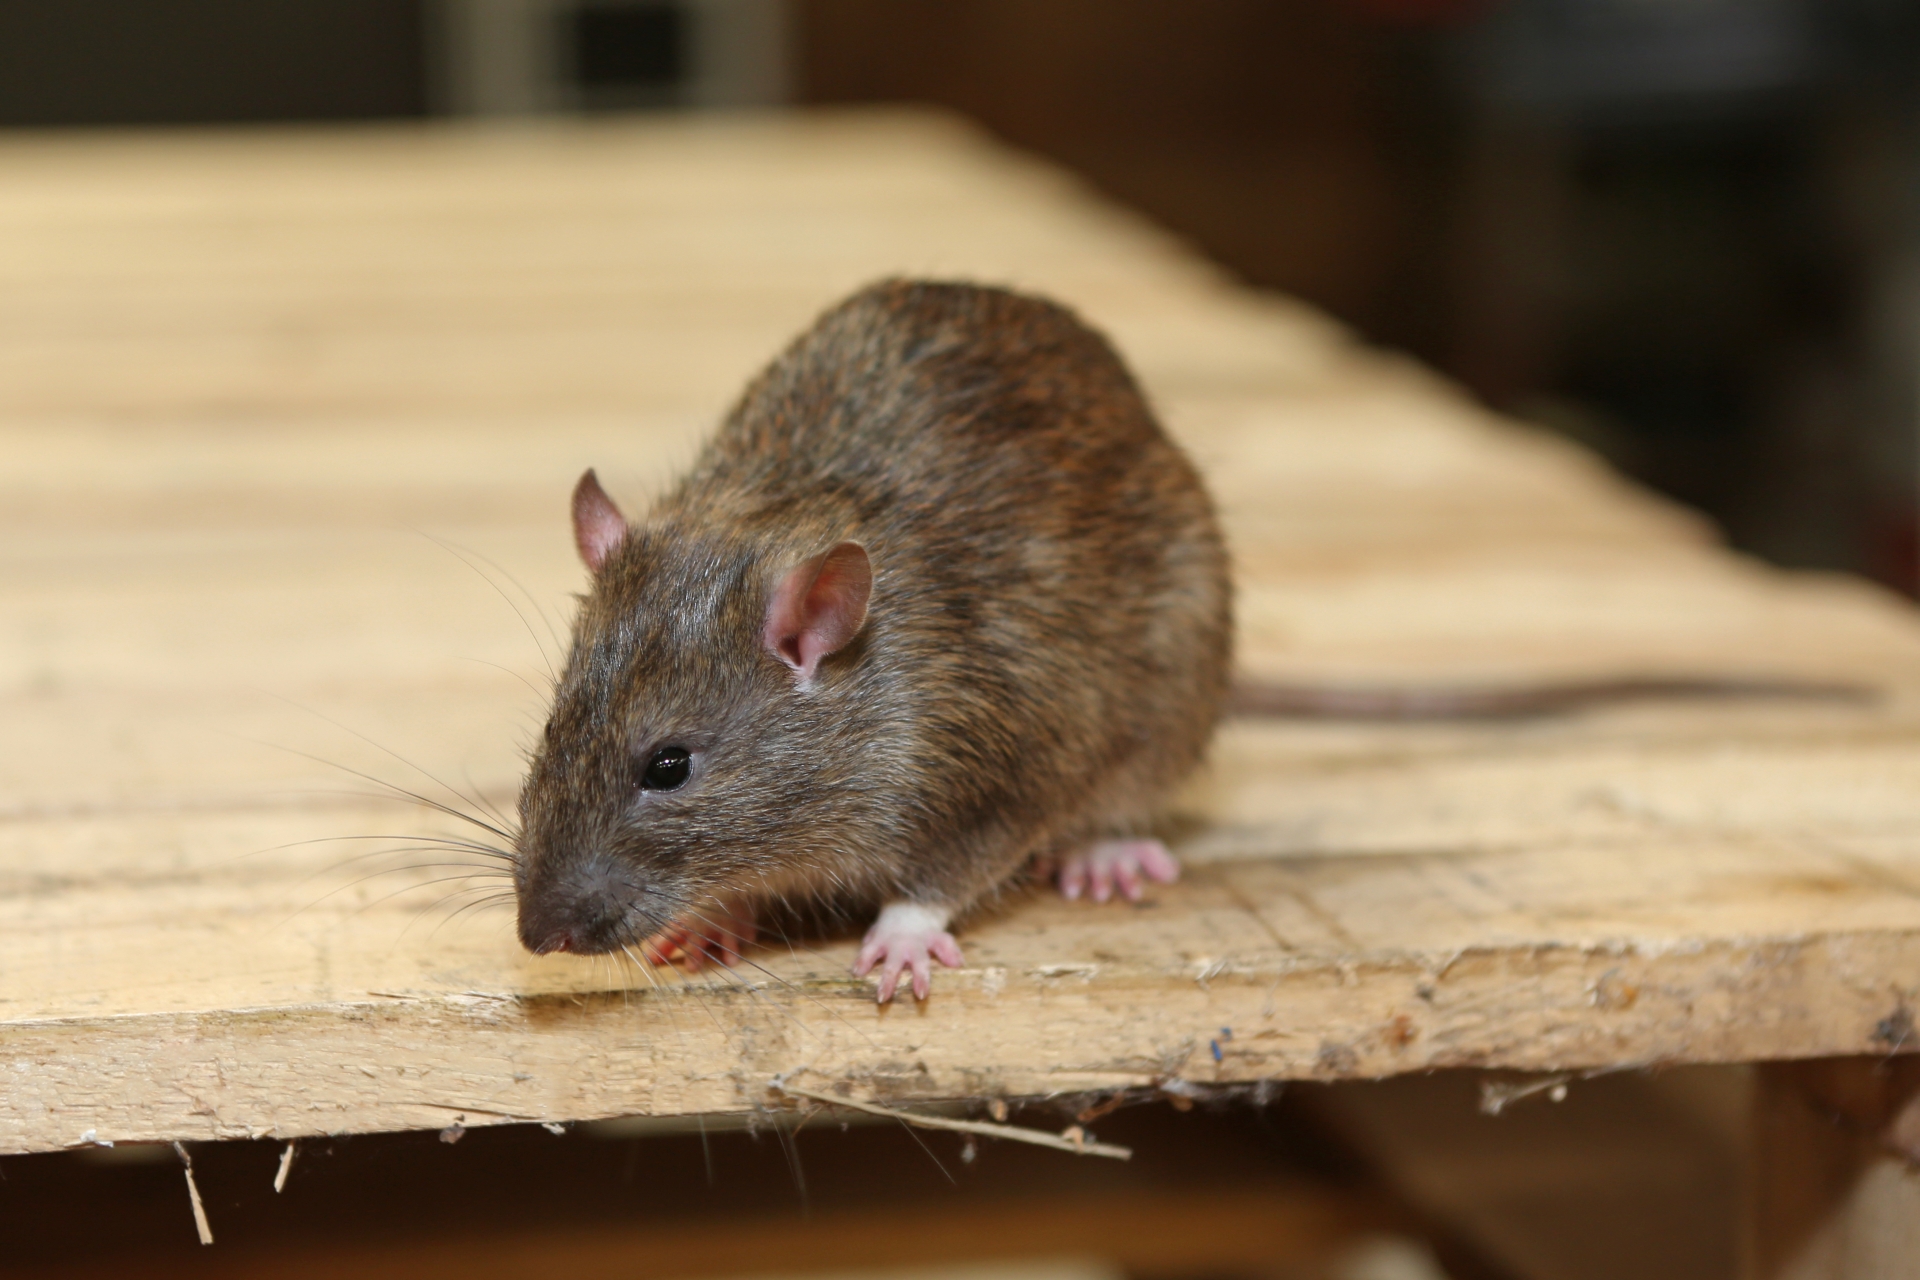 Rat extermination, Pest Control in Dulwich, SE21. Call Now 020 8166 9746